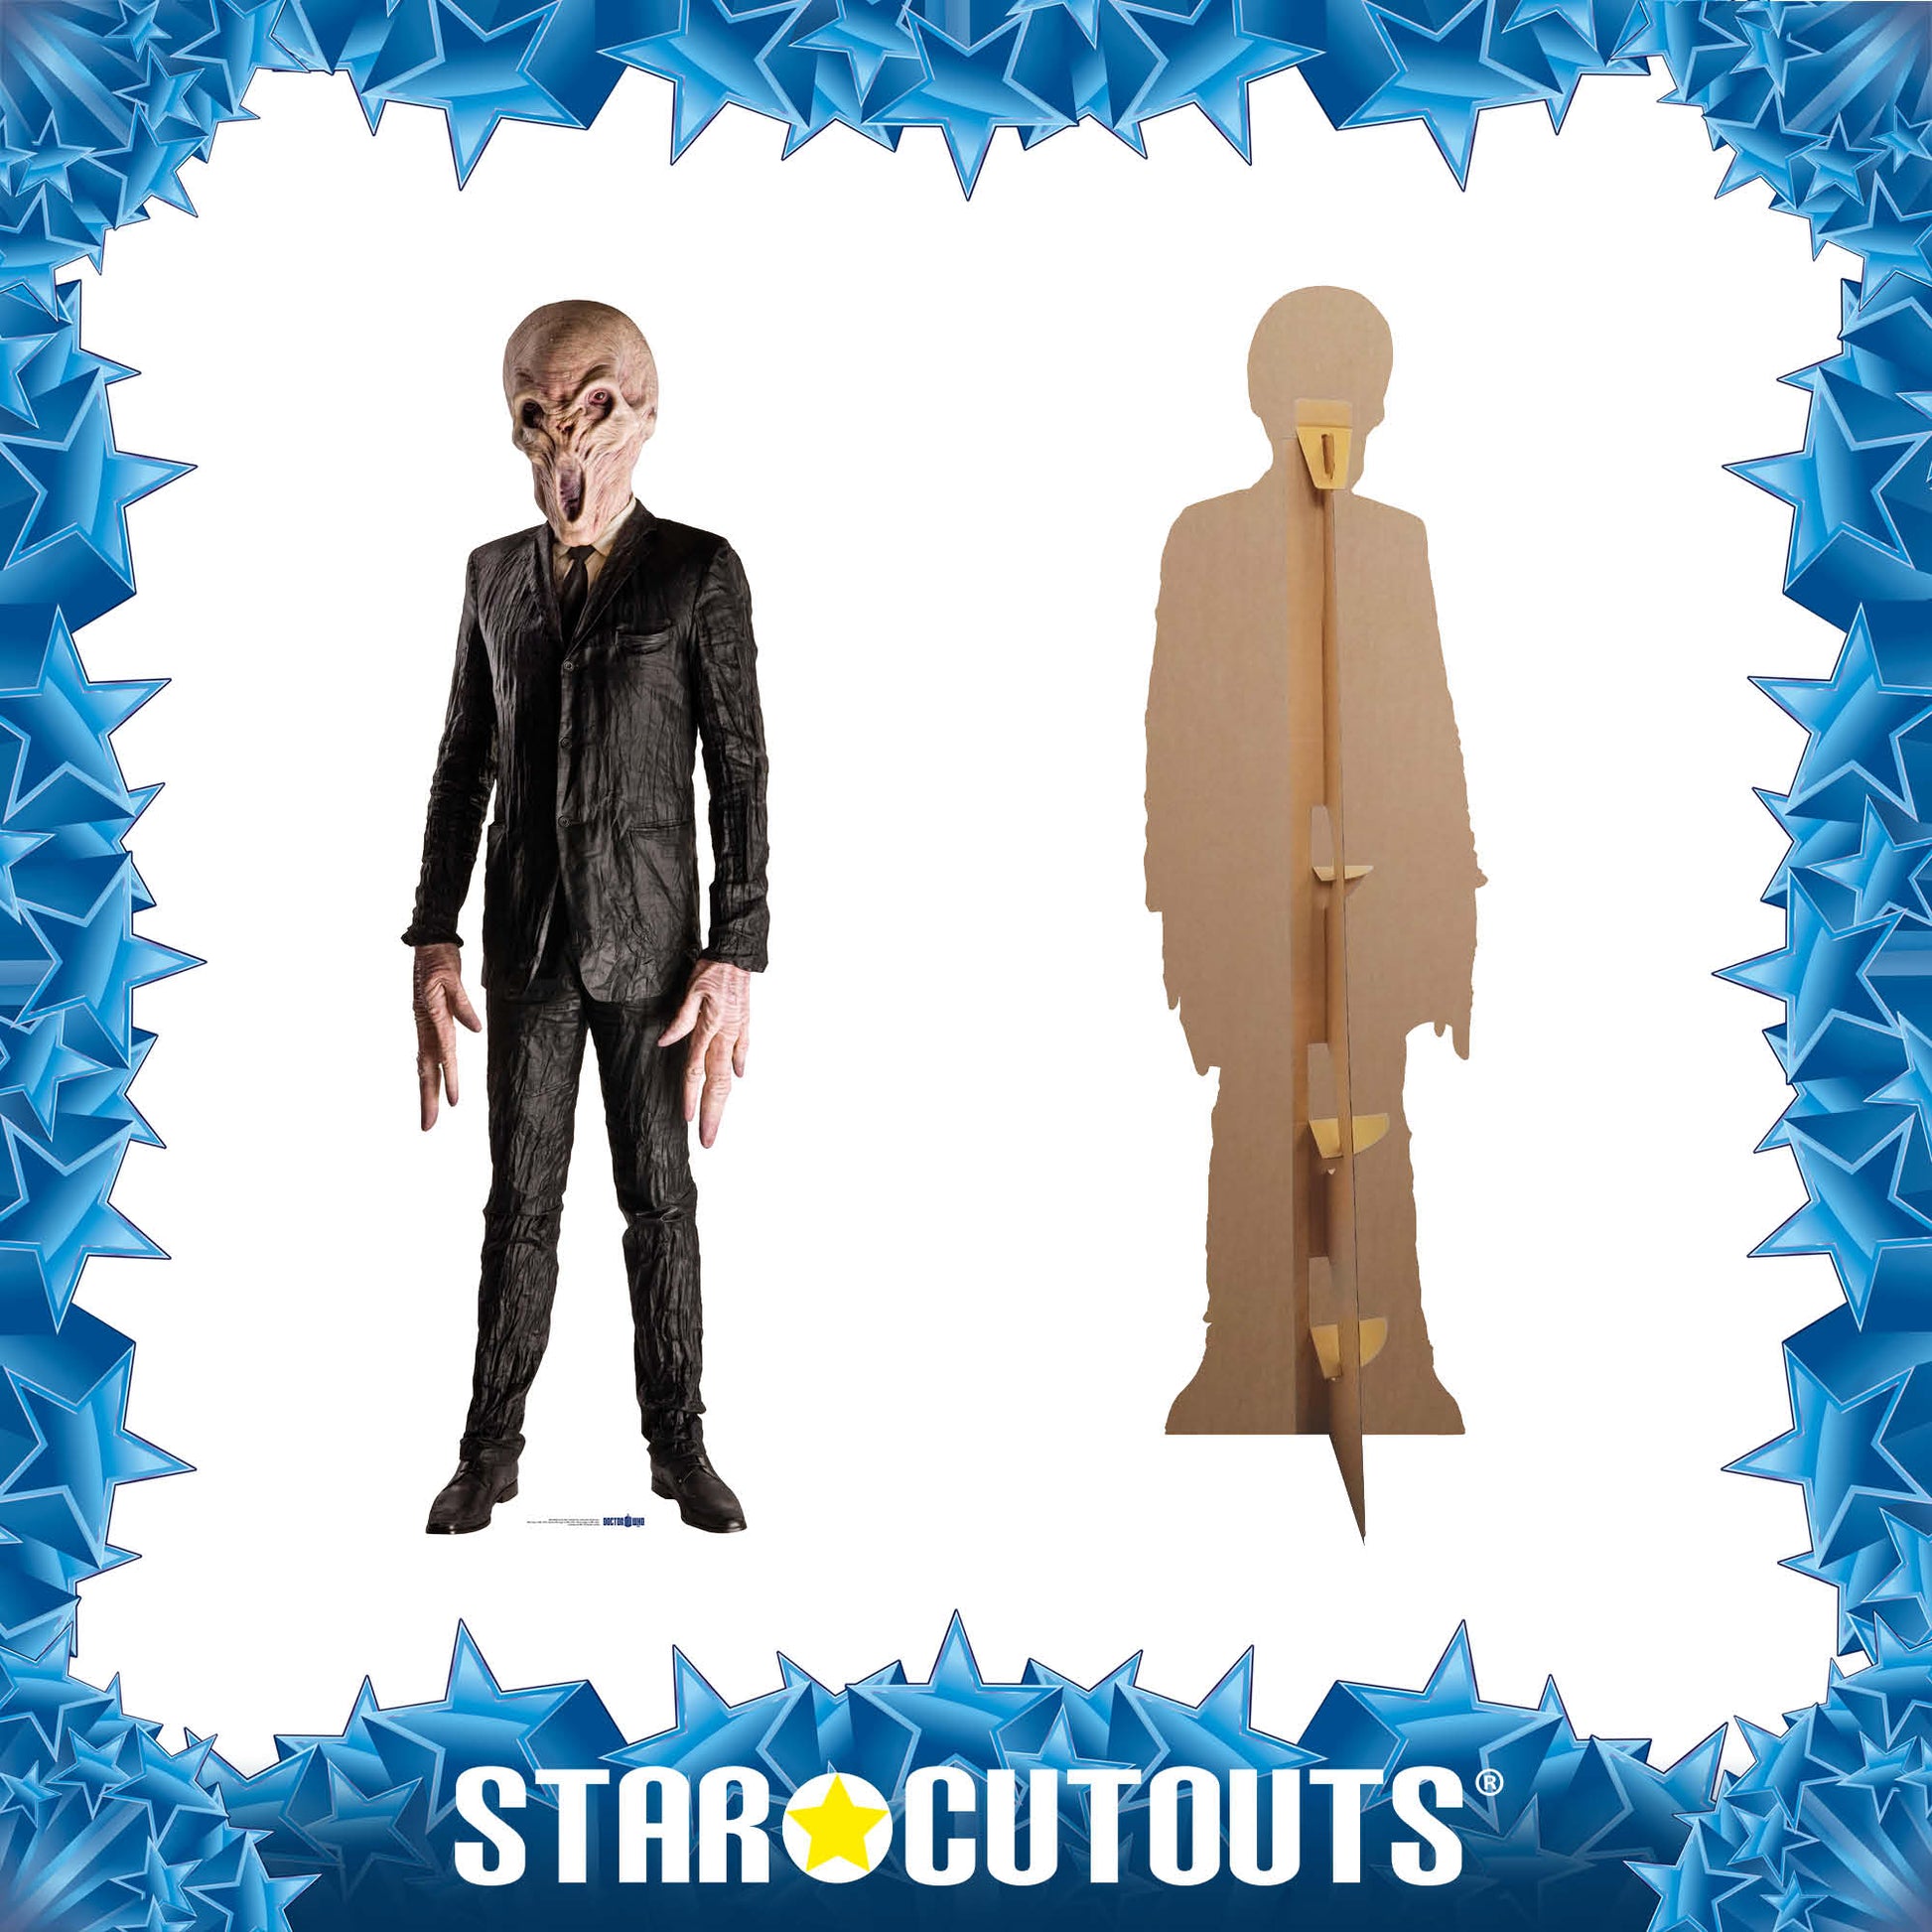 The Silent Cardboard Cut Out Height 195cm - Star Cutouts